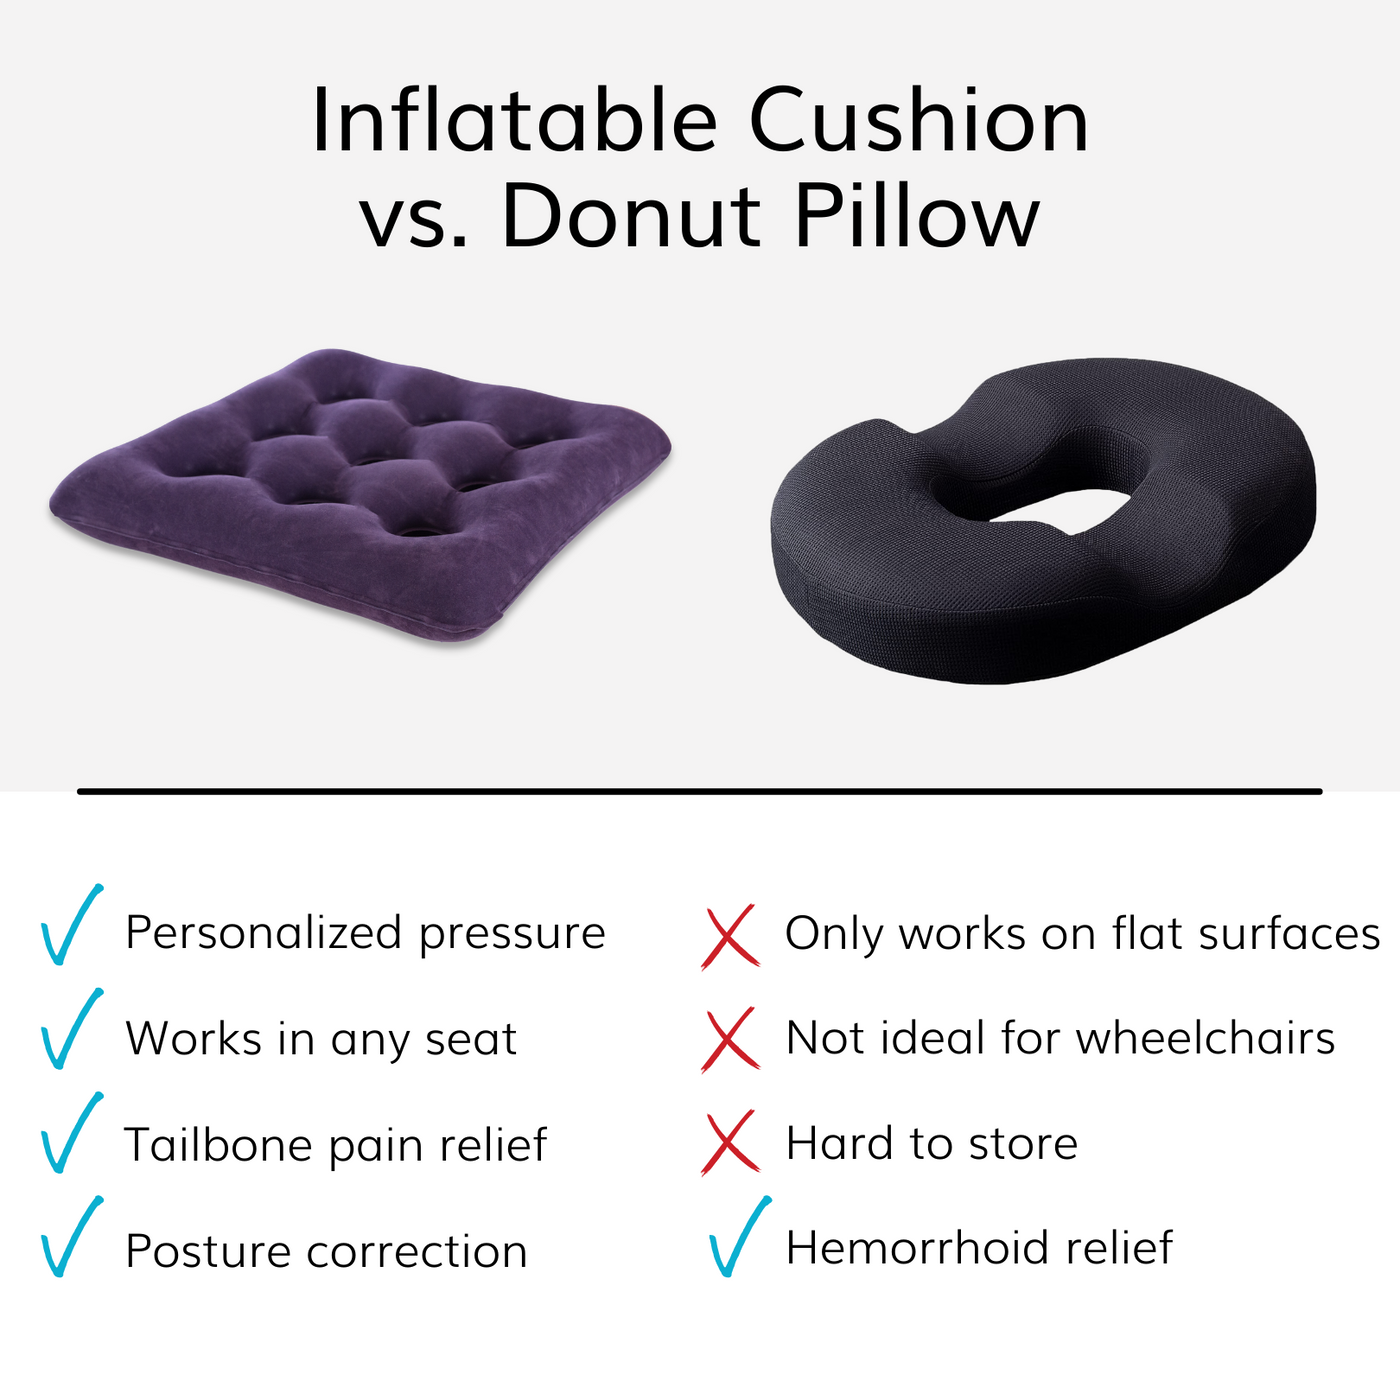 Unlike a donut pressure sore cushion, the inflatable pillow works on any seat to promote posture correction